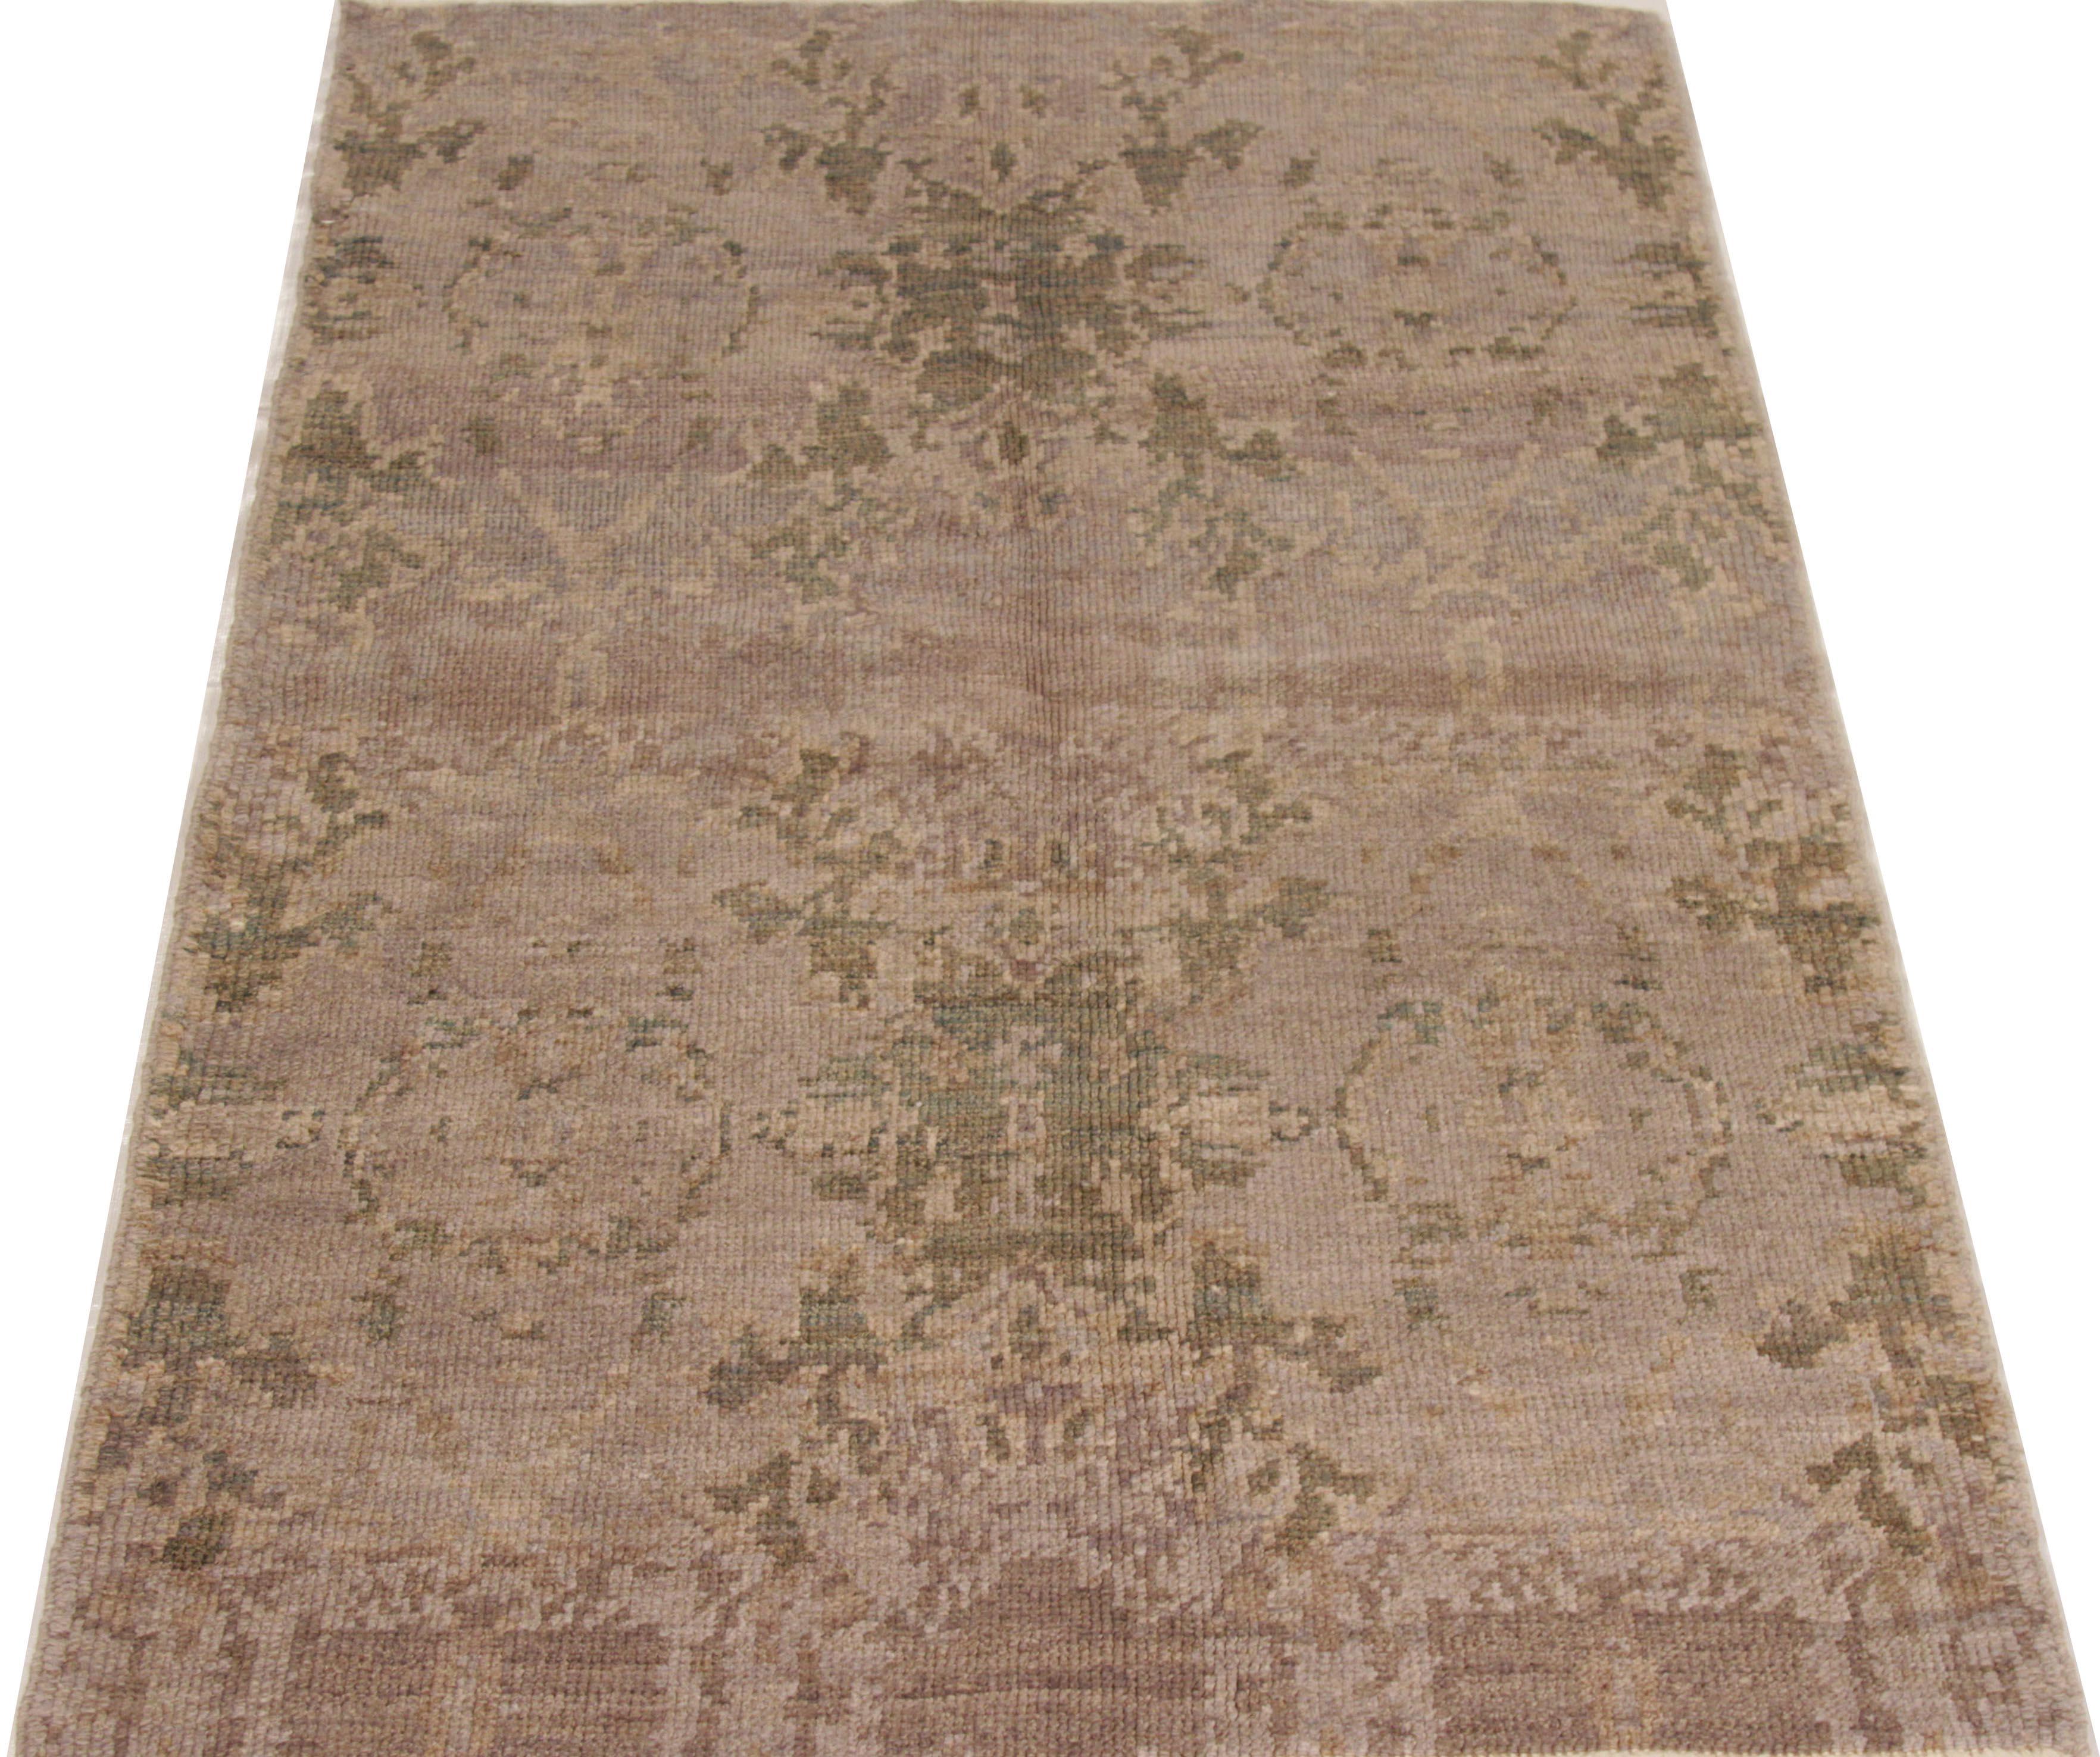 Contemporary Oushak Persian Rug in Green and Brown Garden Motif For Sale 3